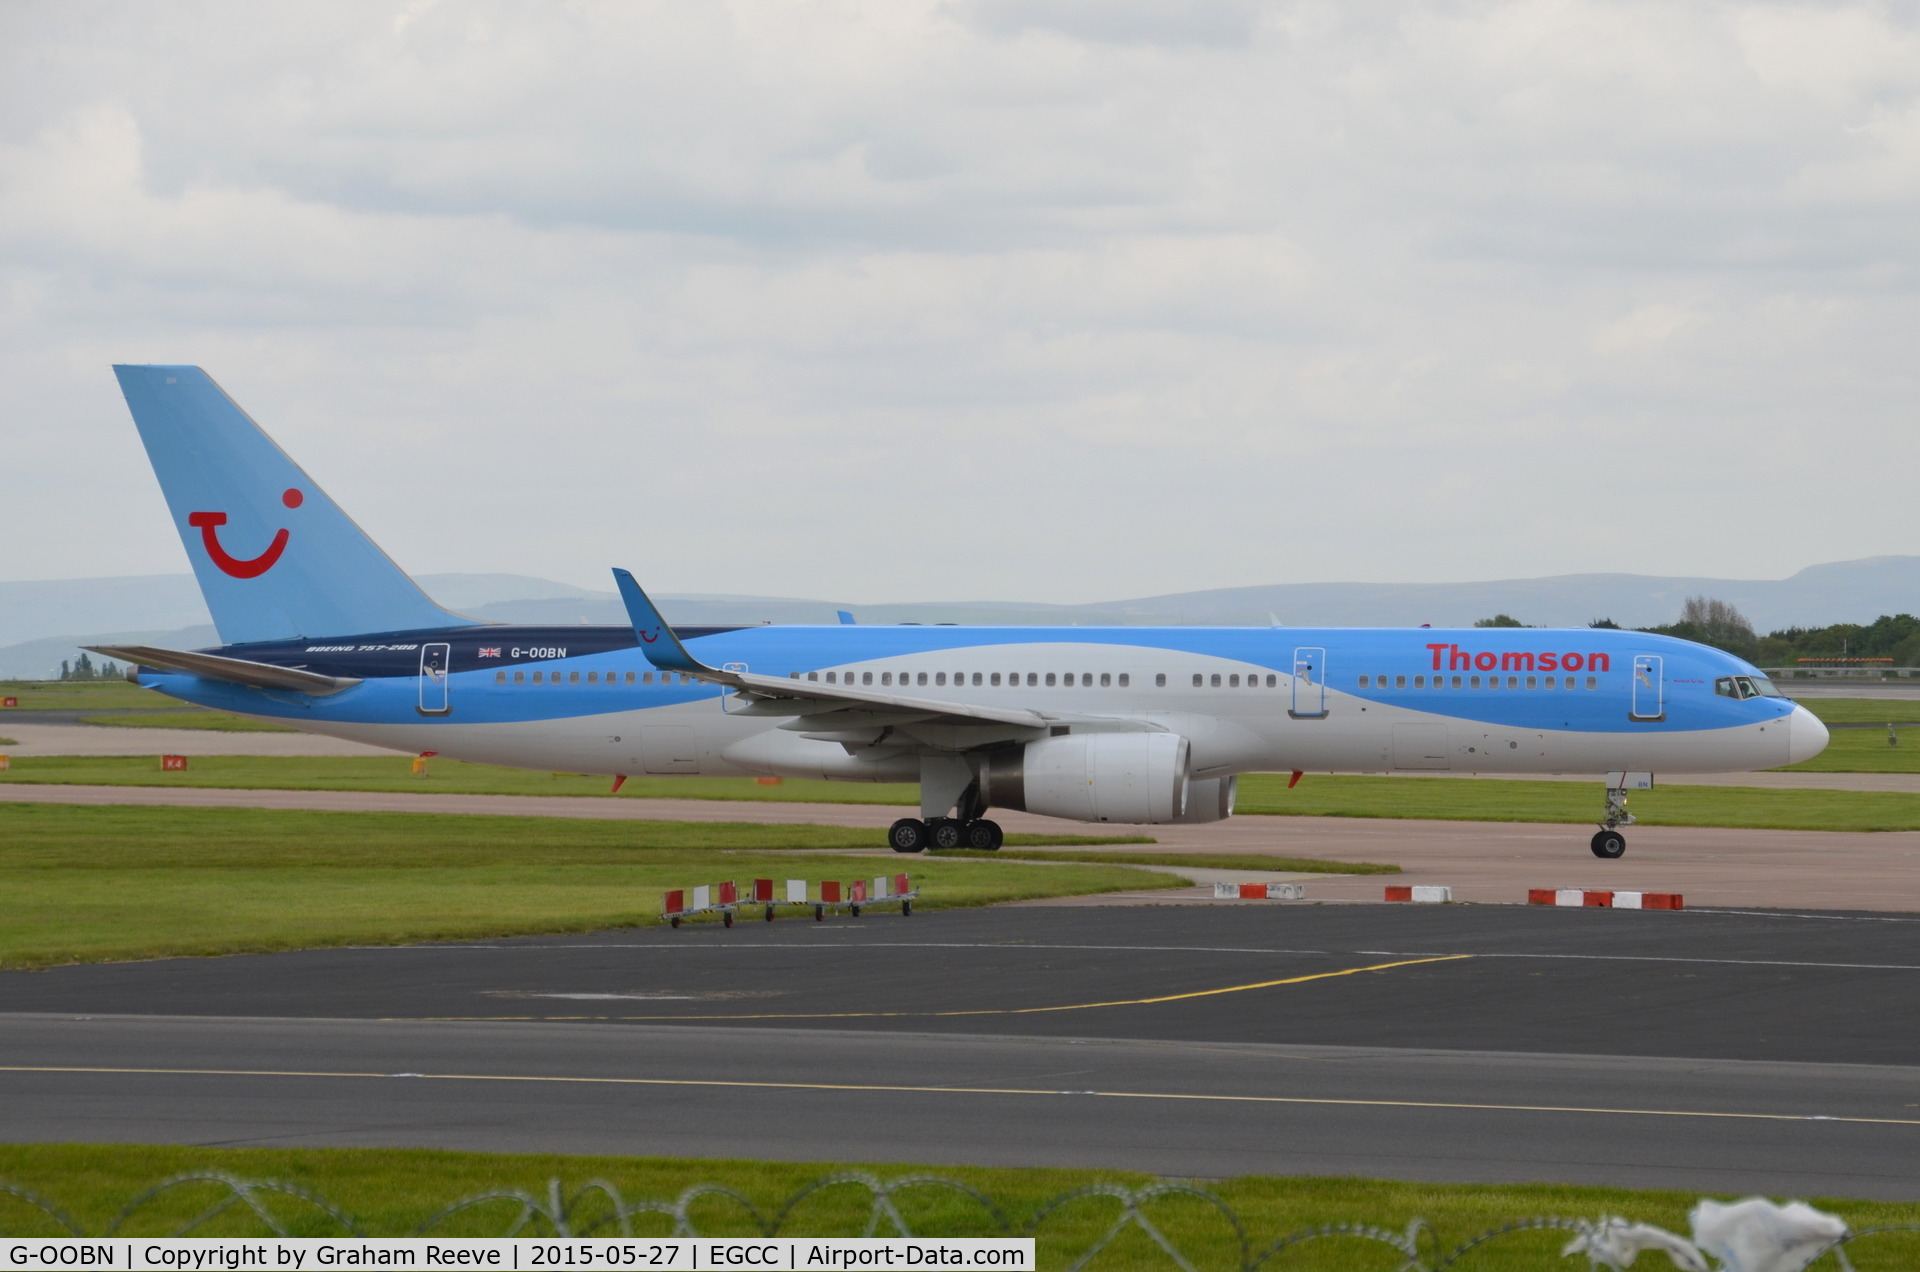 G-OOBN, 2000 Boeing 757-2G5 C/N 29379, At Manchester.